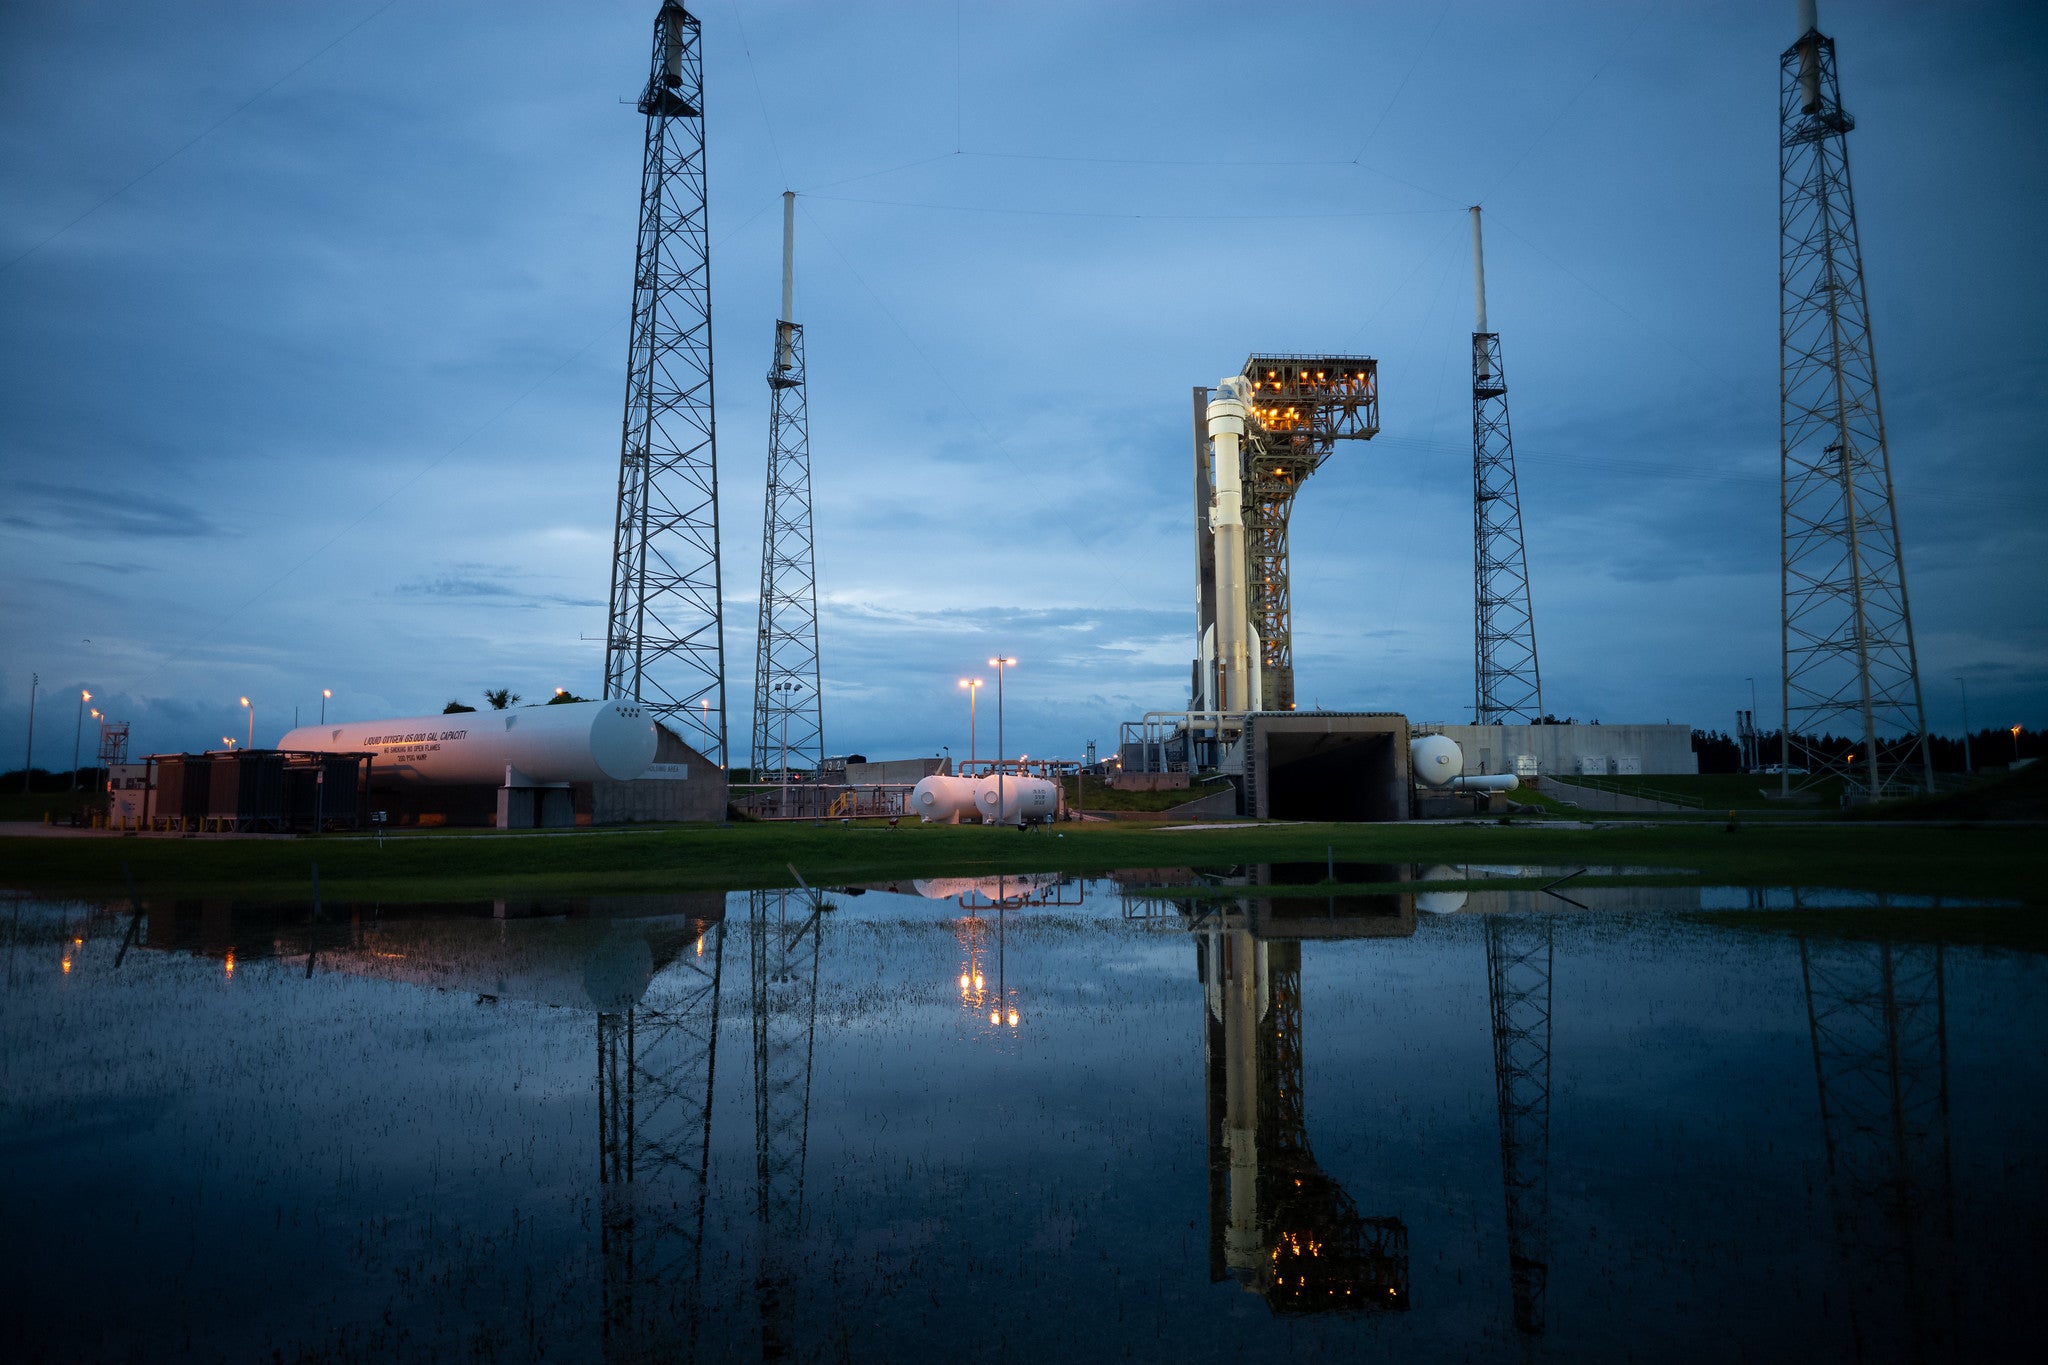 A United Launch Alliance Atlas V rocket with Boeing's CST-100 Starliner spacecraft at Cape Canaveral's Space Launch Complex 41 on August 2, 2021.  (Image: NASA/Joel Kowsky)